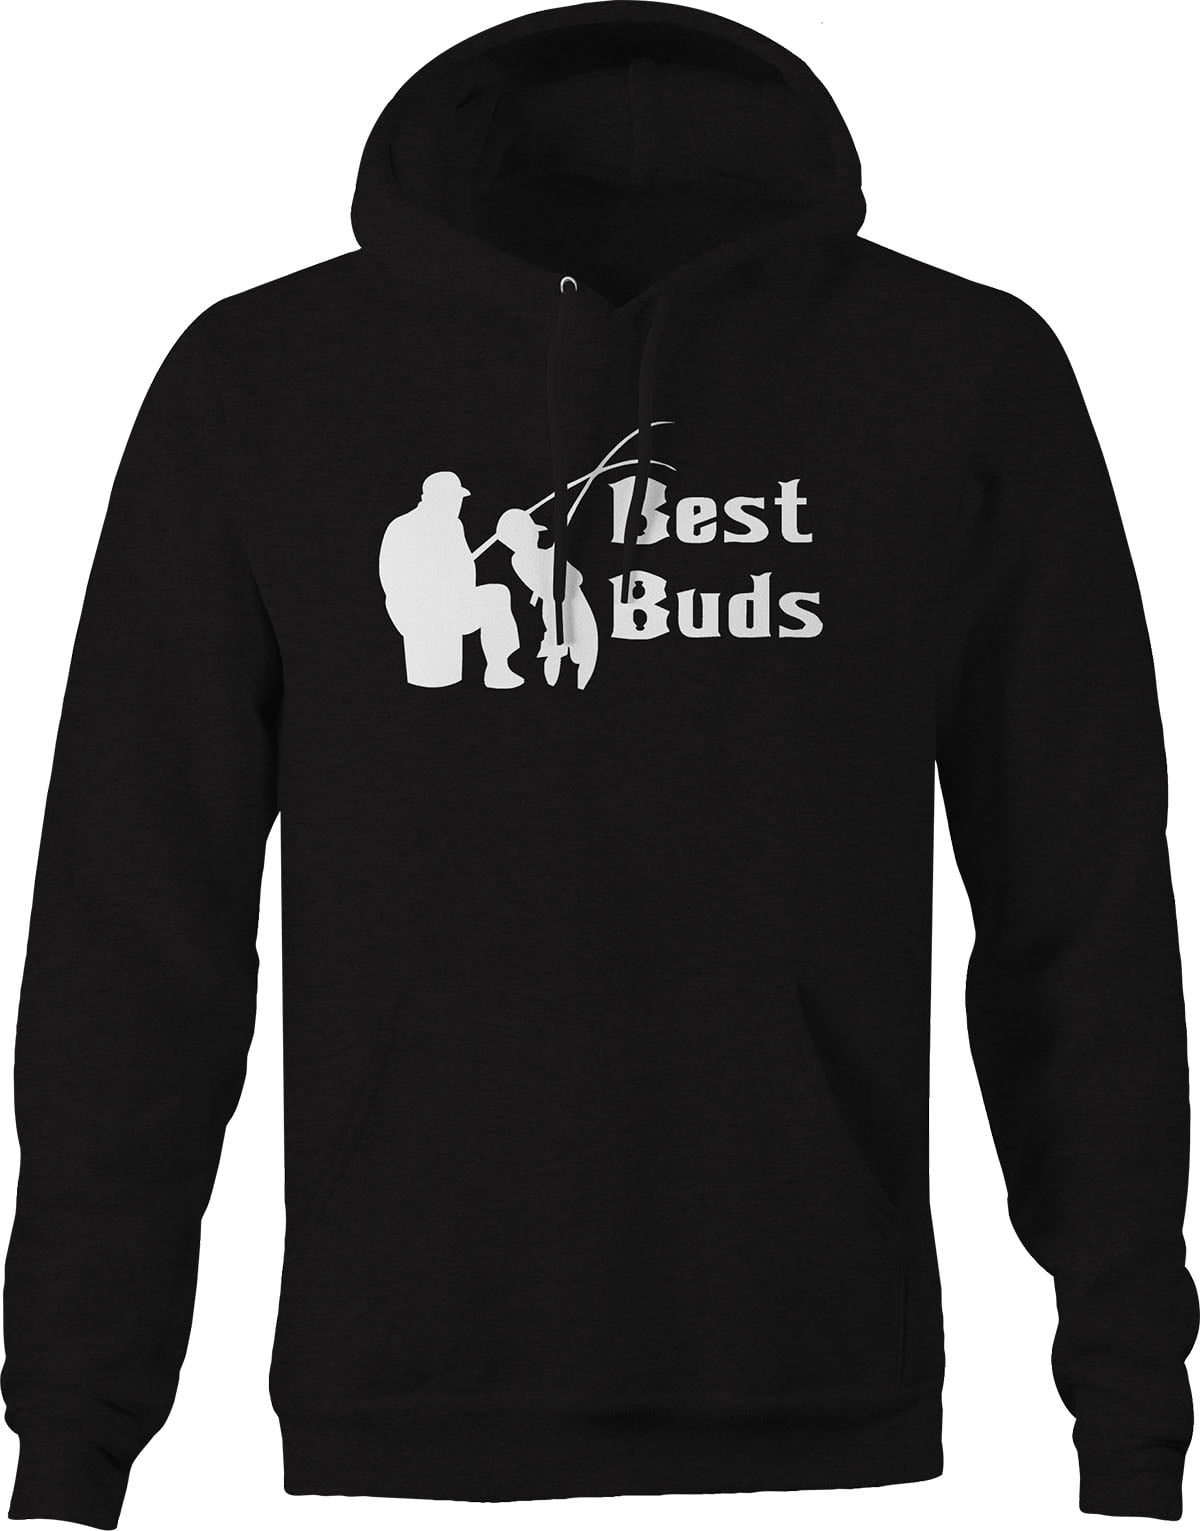 Best Buds Father Son Fishing Hoodie for Big Men 3XL Black